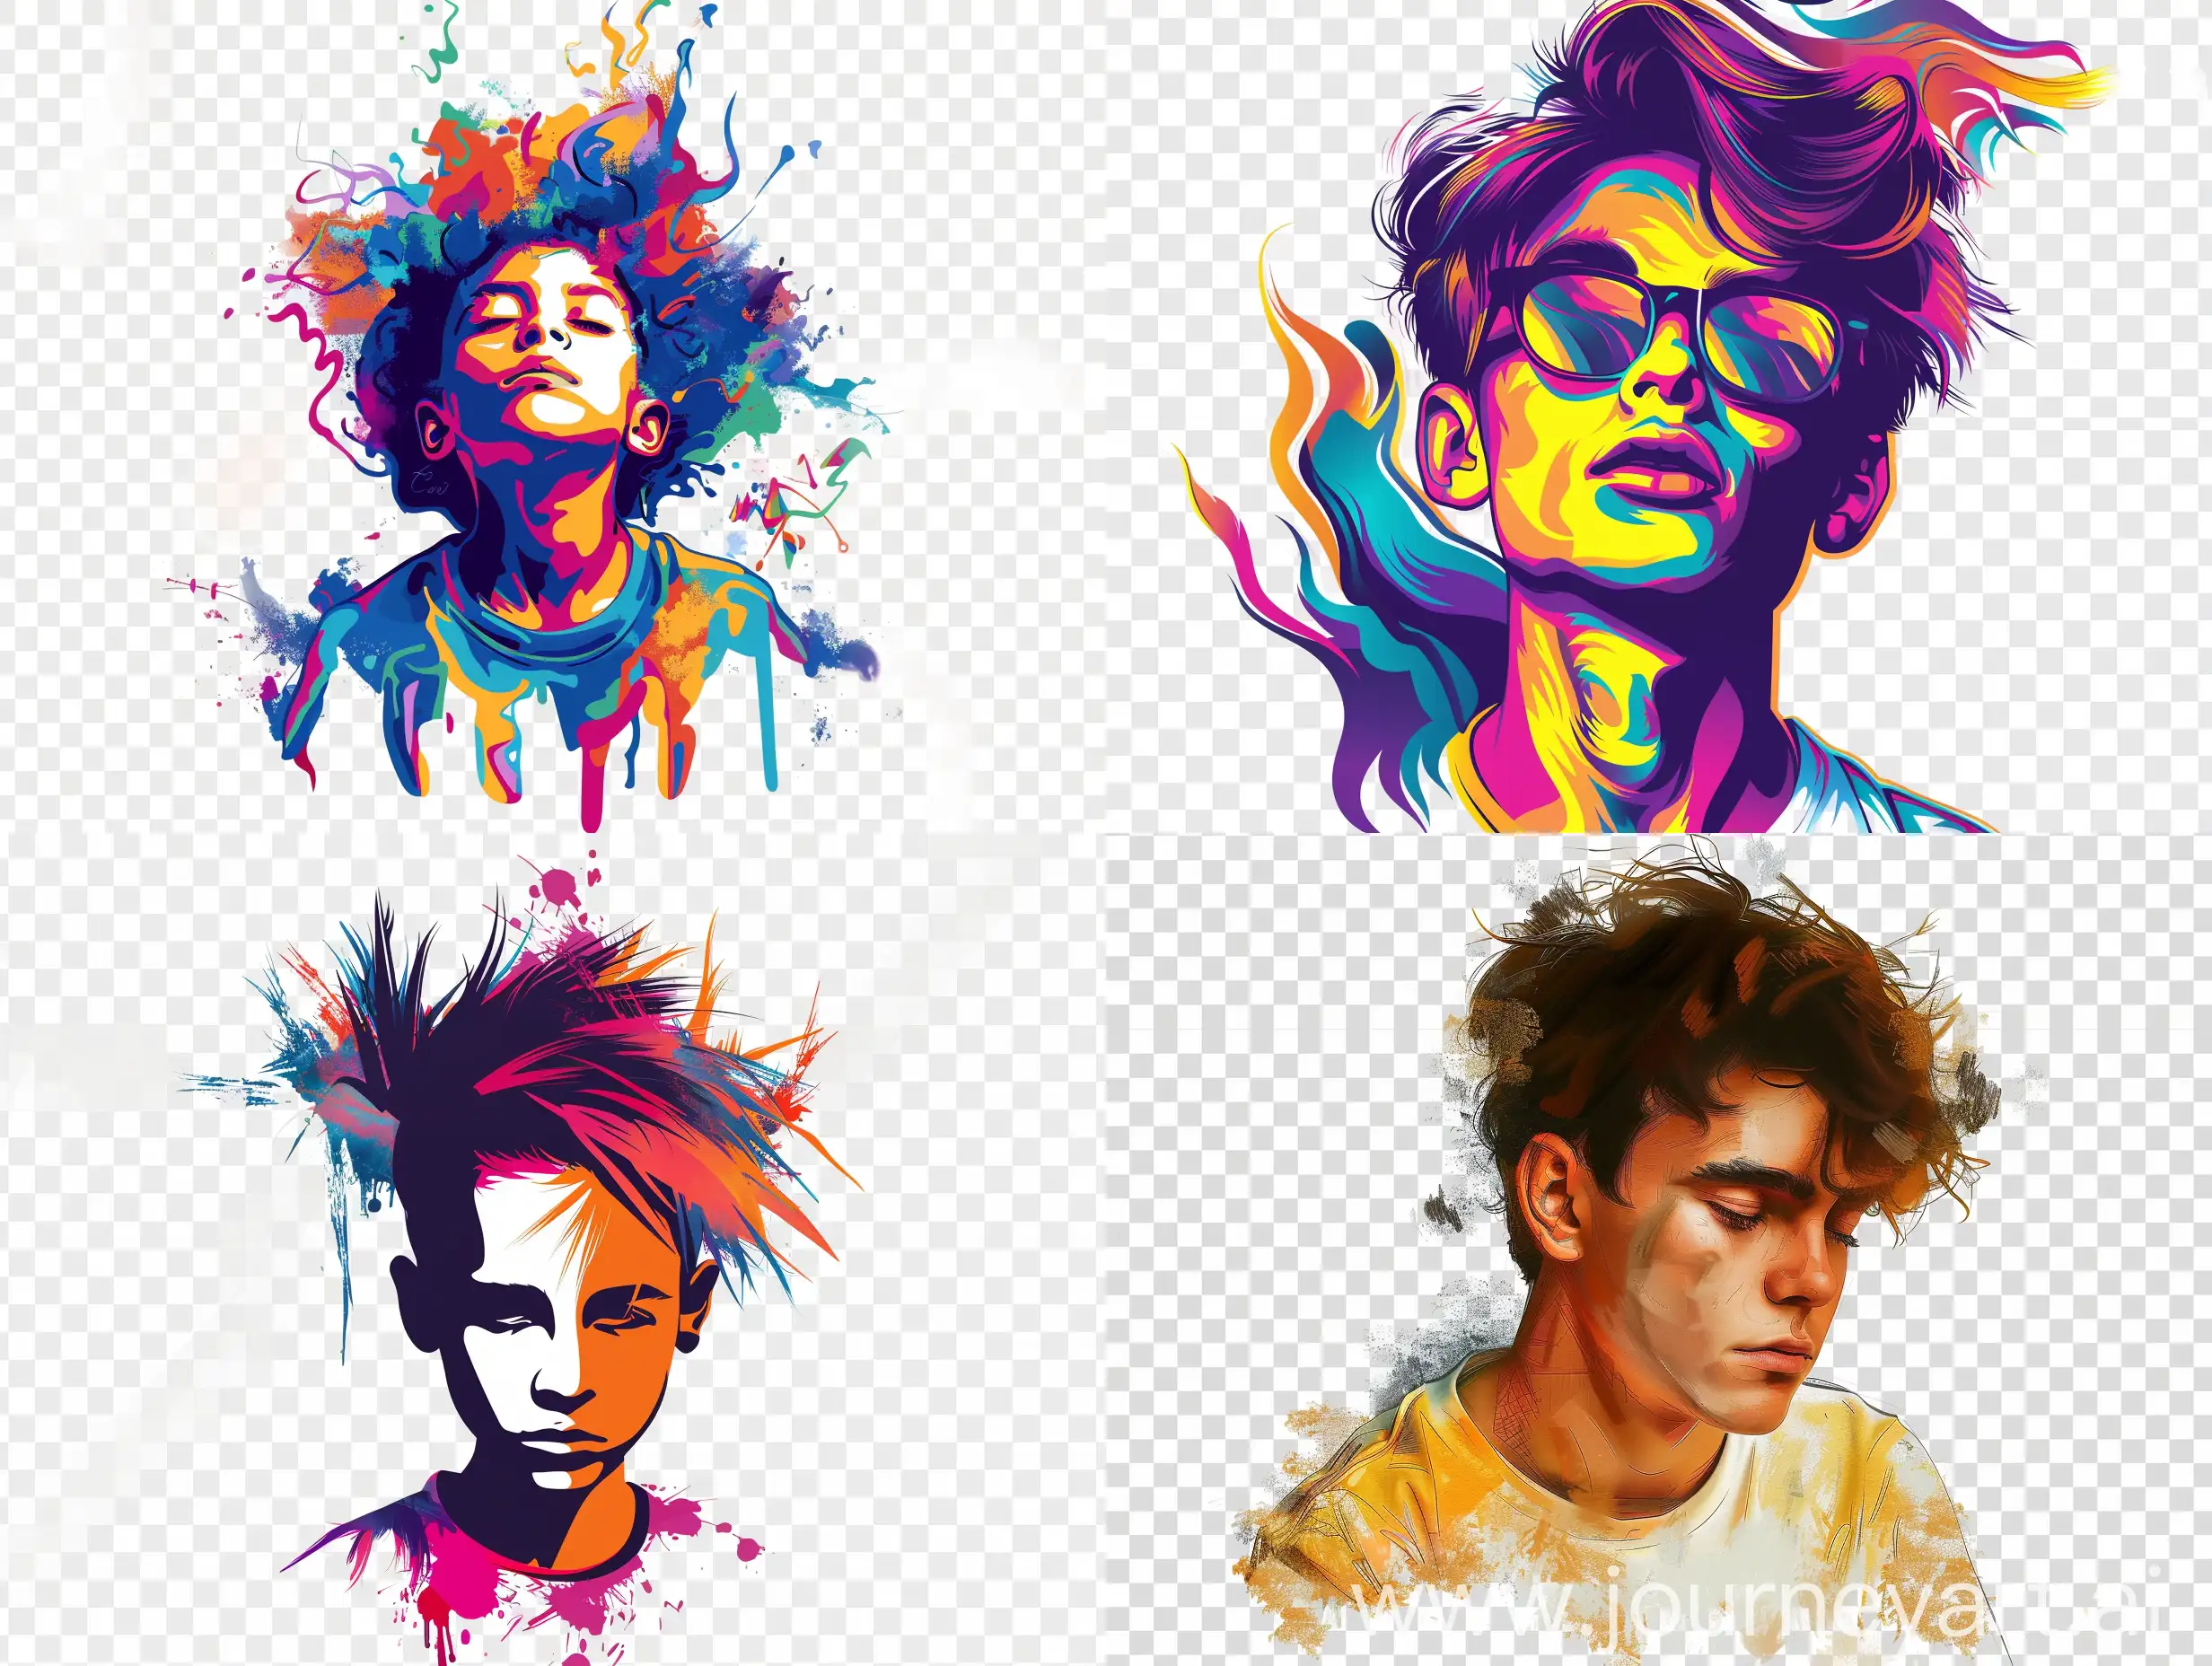 Create T shirt art, a cool boy with clury hairs,vibrant and modern look.cool art,background is transparent.